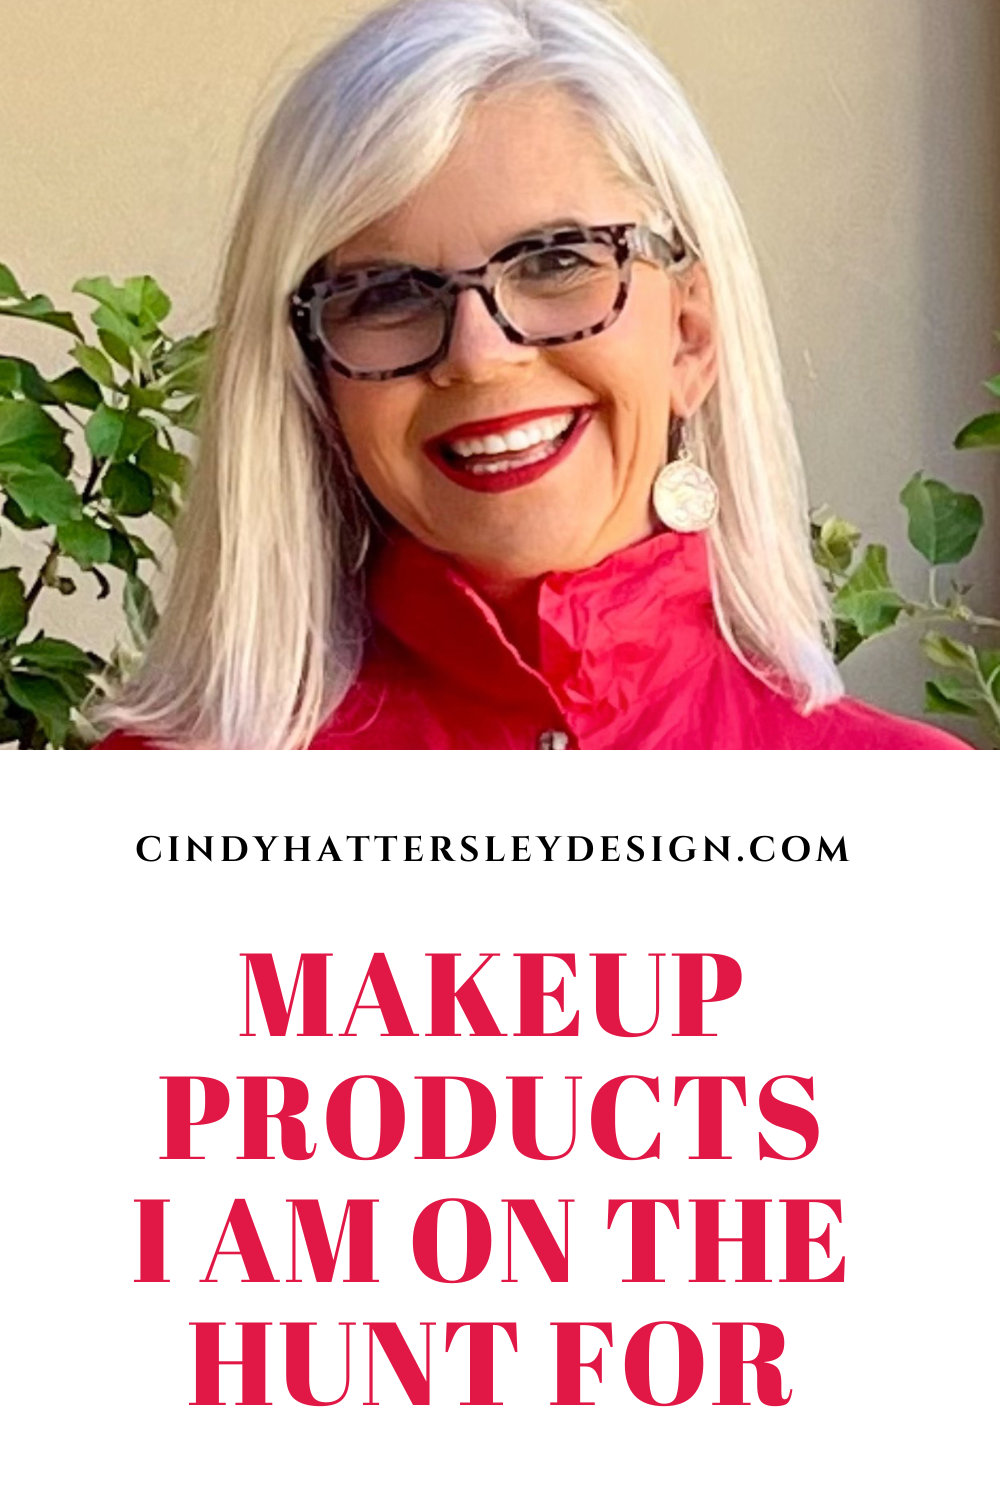 makeup products i am on the hunt for-cindy hattersley